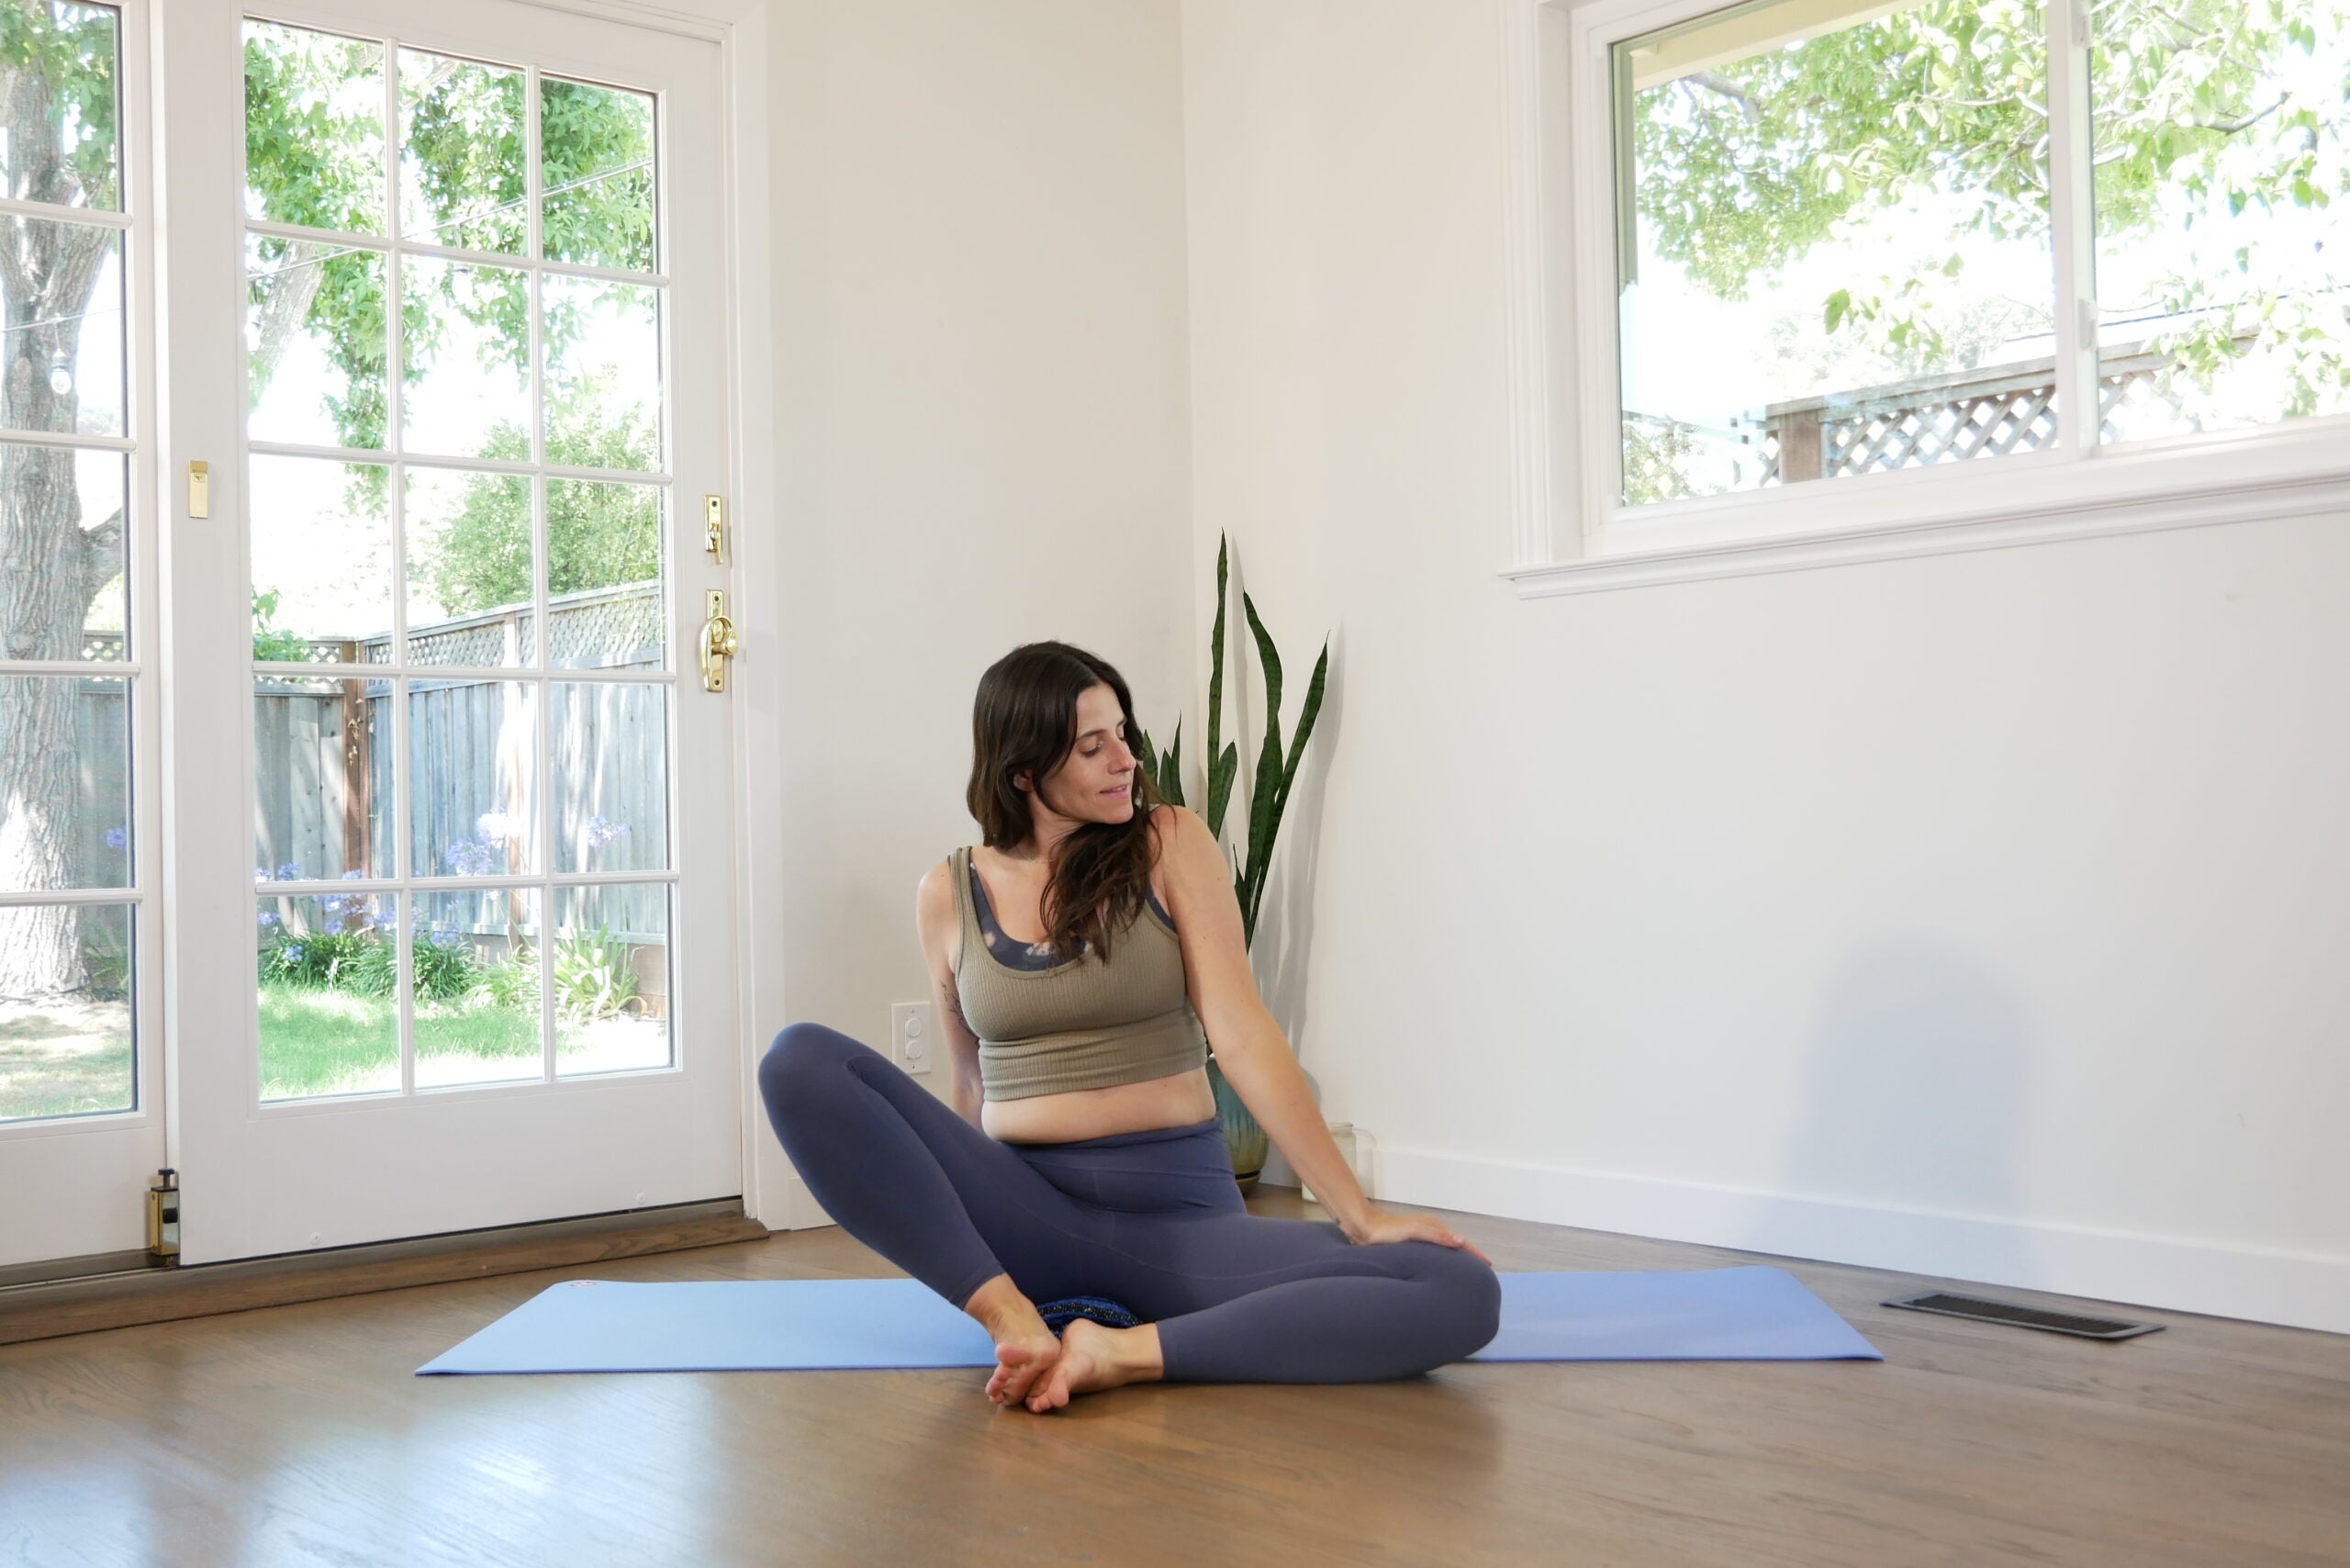 5 Yoga Poses to Safely Stretch Tight Groin Muscles - Yoga Journal